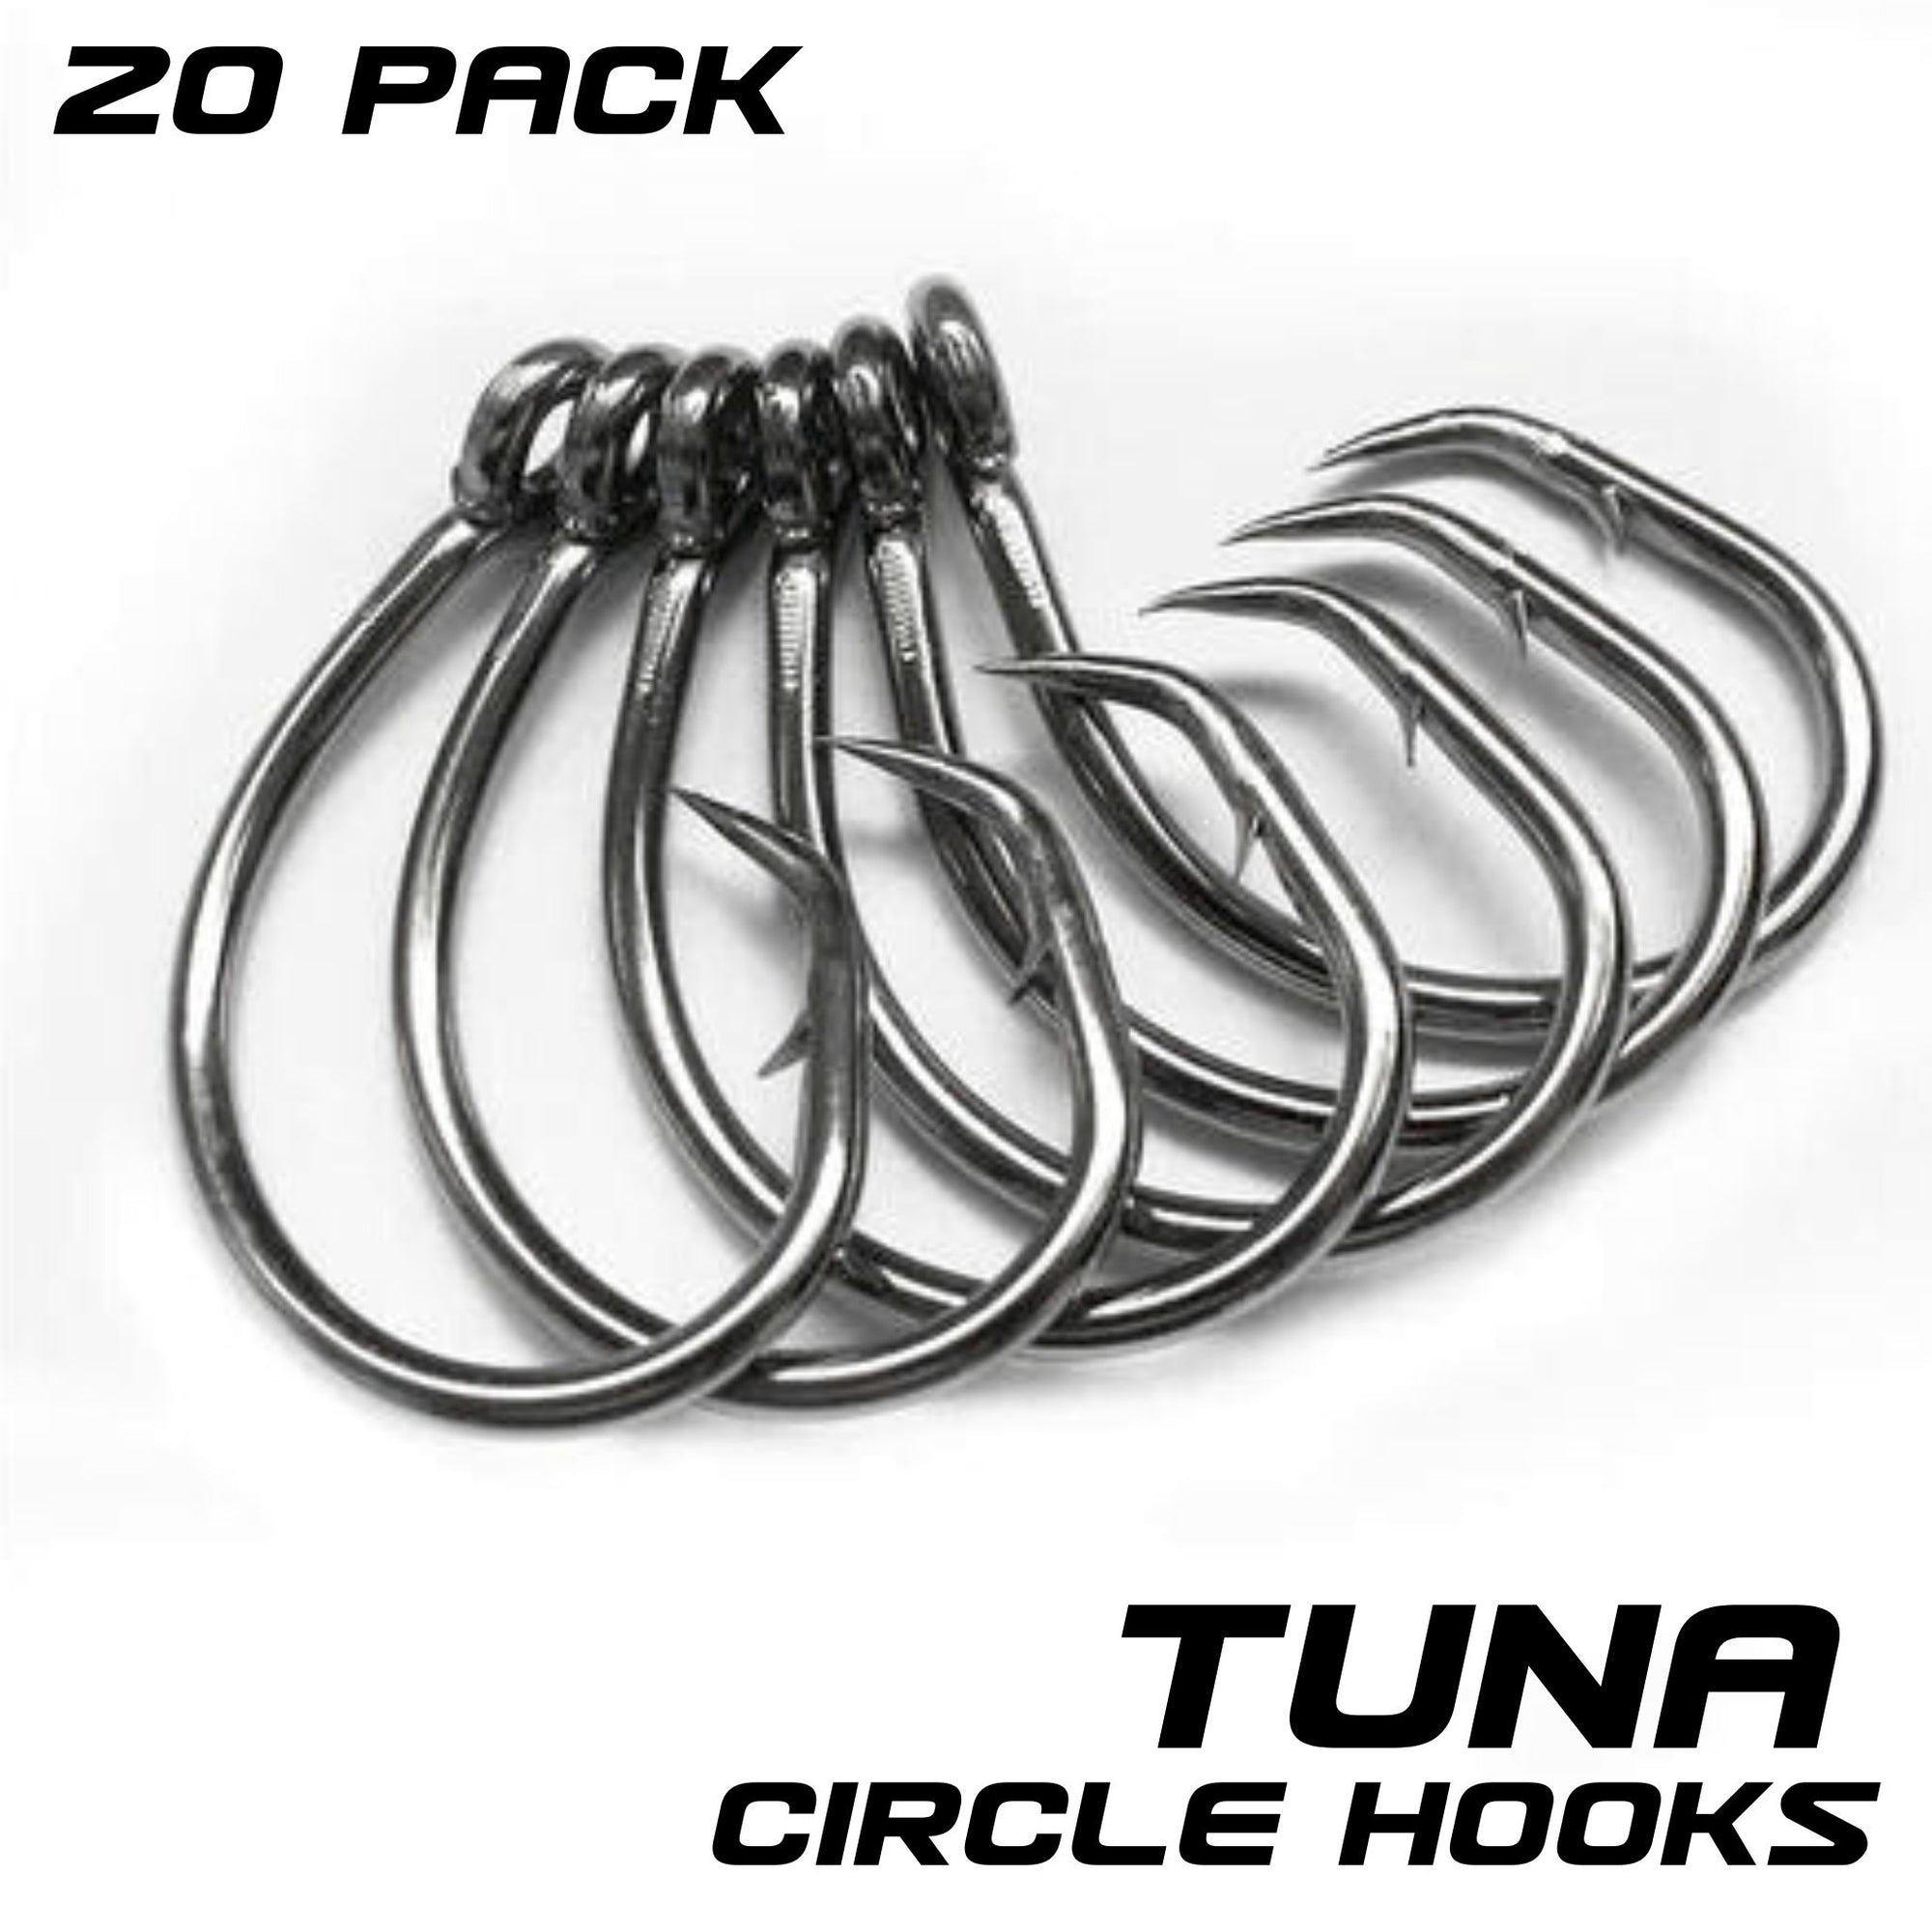 20 X Chemically Sharpened Tuna Circle Hooks Sizes 11/0, 13/0, 15/0, 18/0 Fishing Tackle - South East Clearance Centre